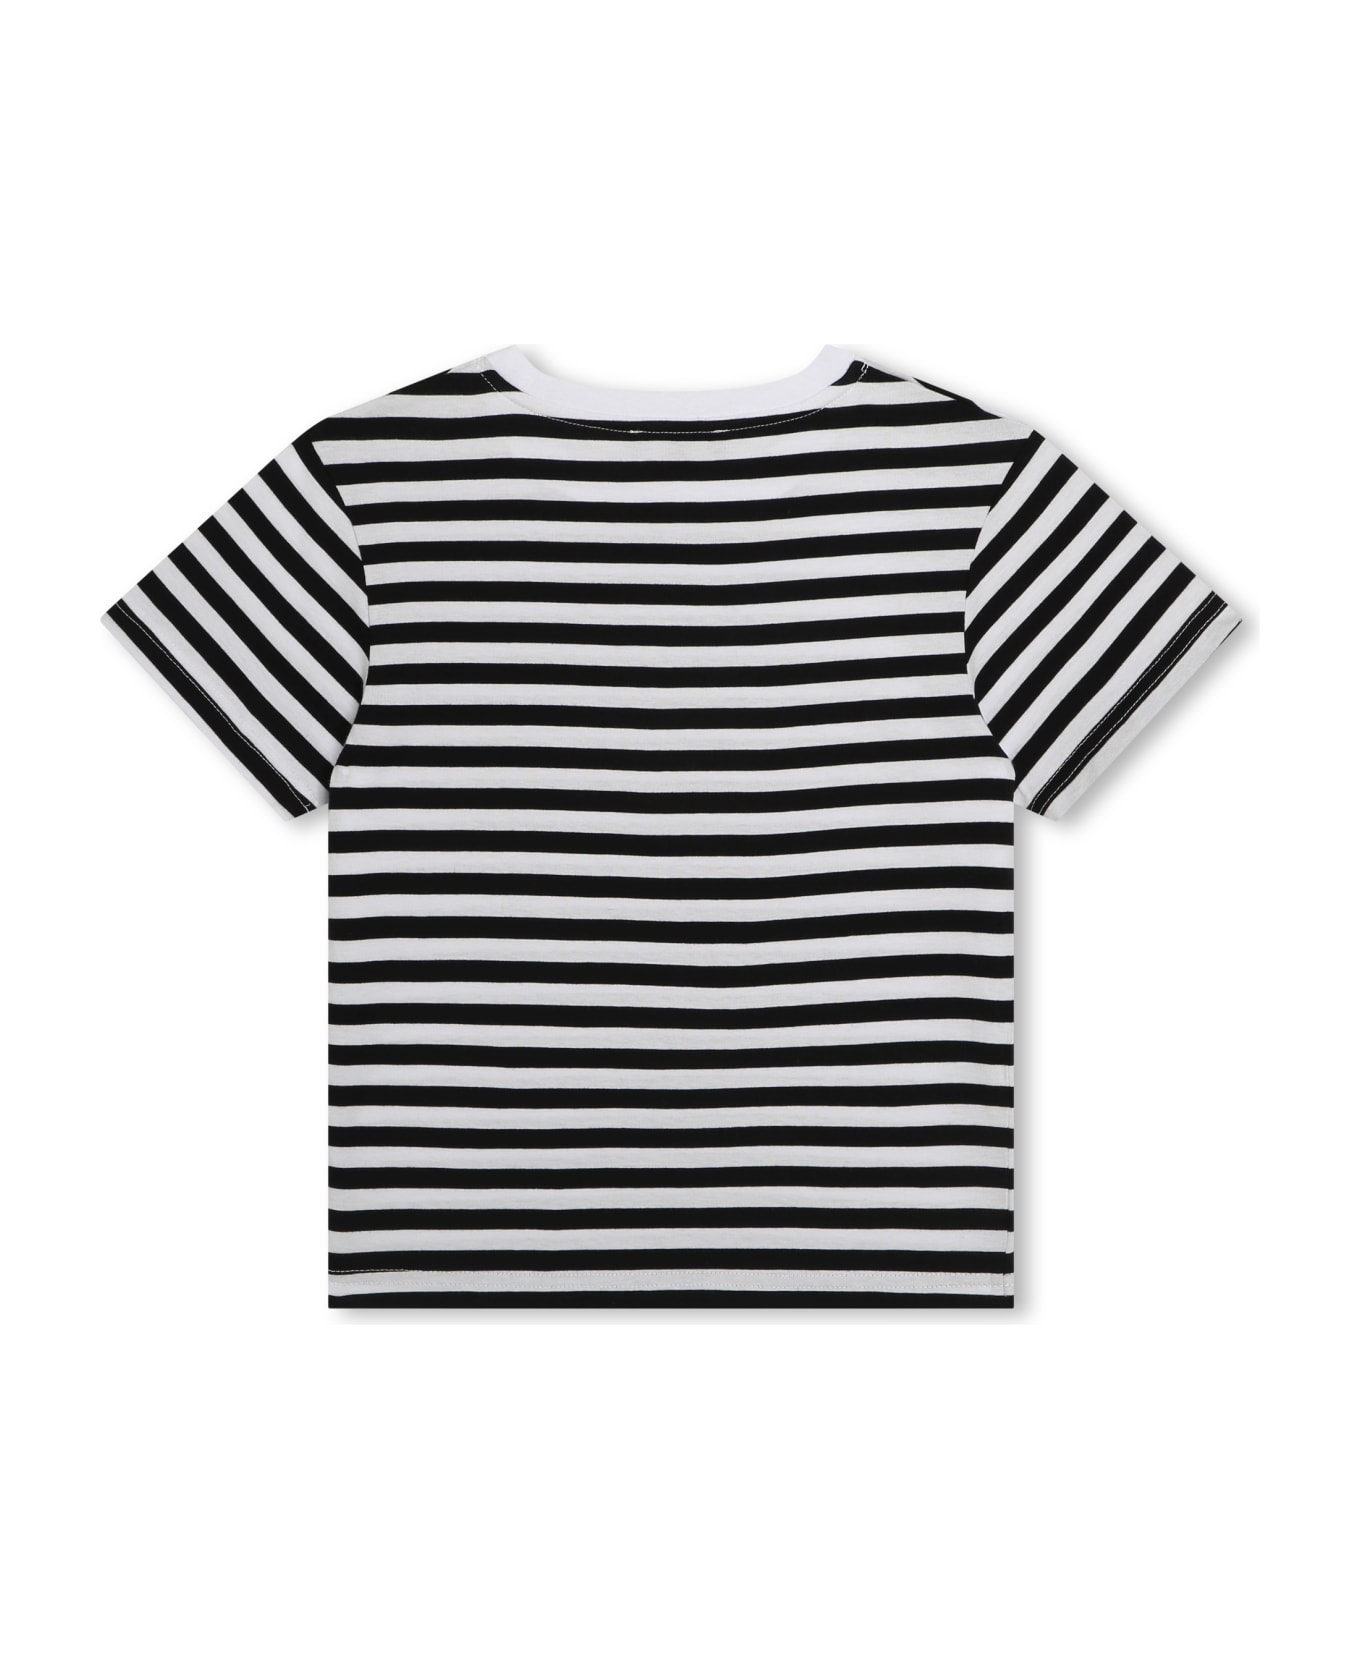 DKNY T-shirt With Stripe - White Tシャツ＆ポロシャツ